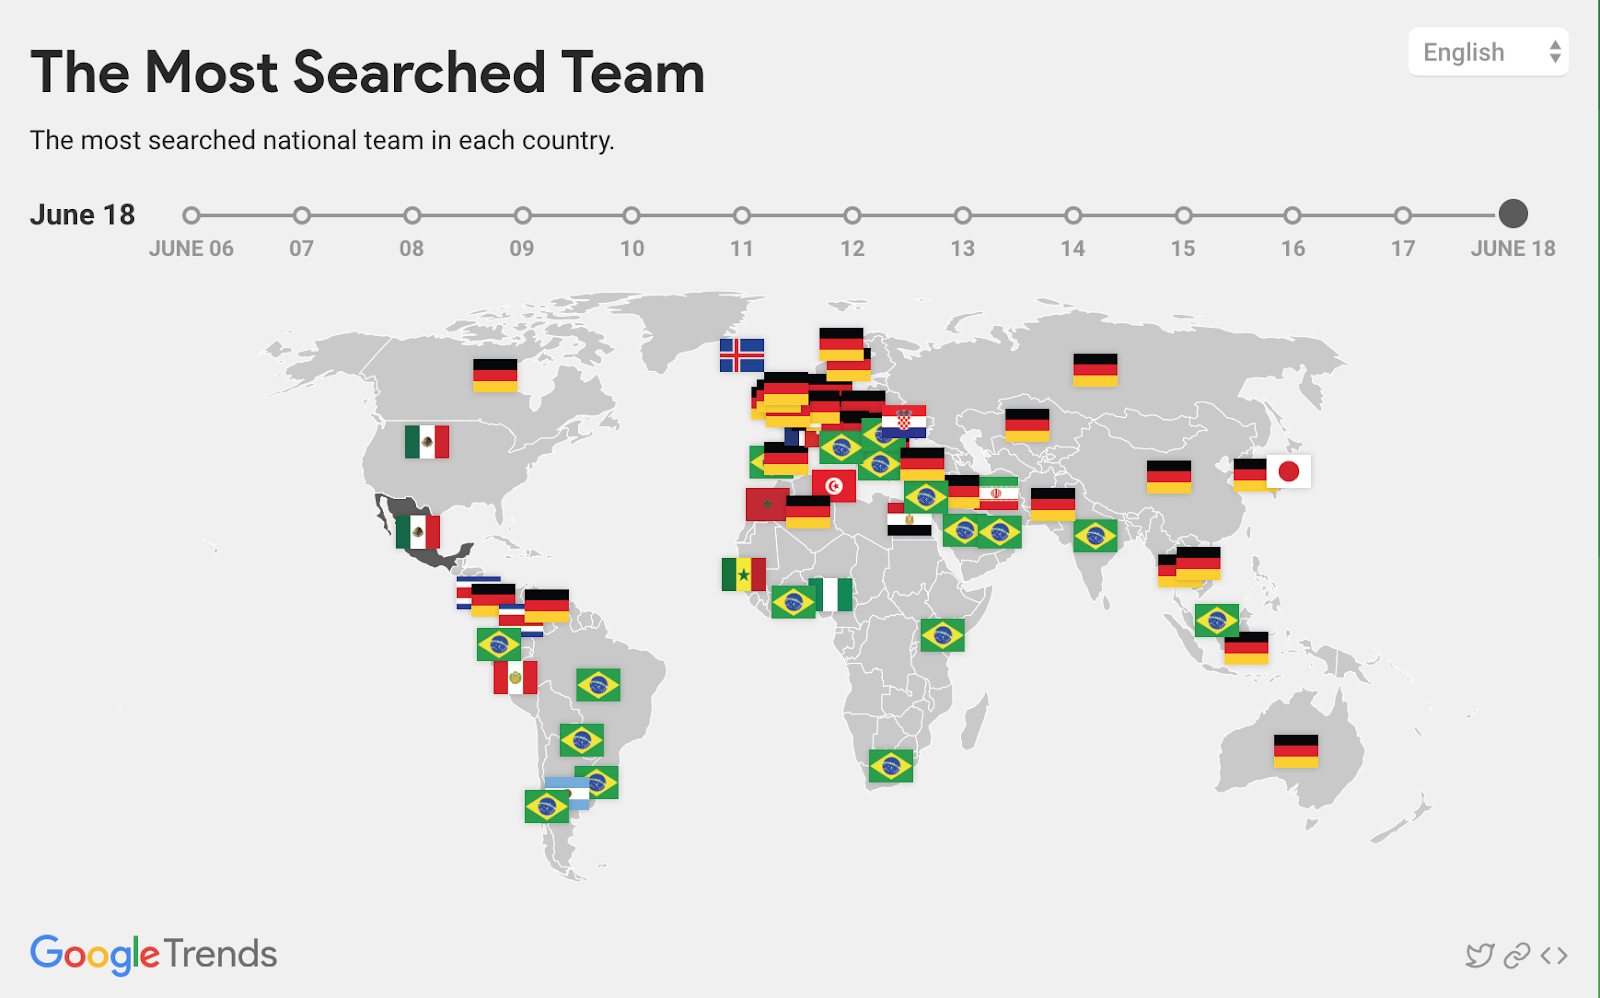 The most searched teams by country